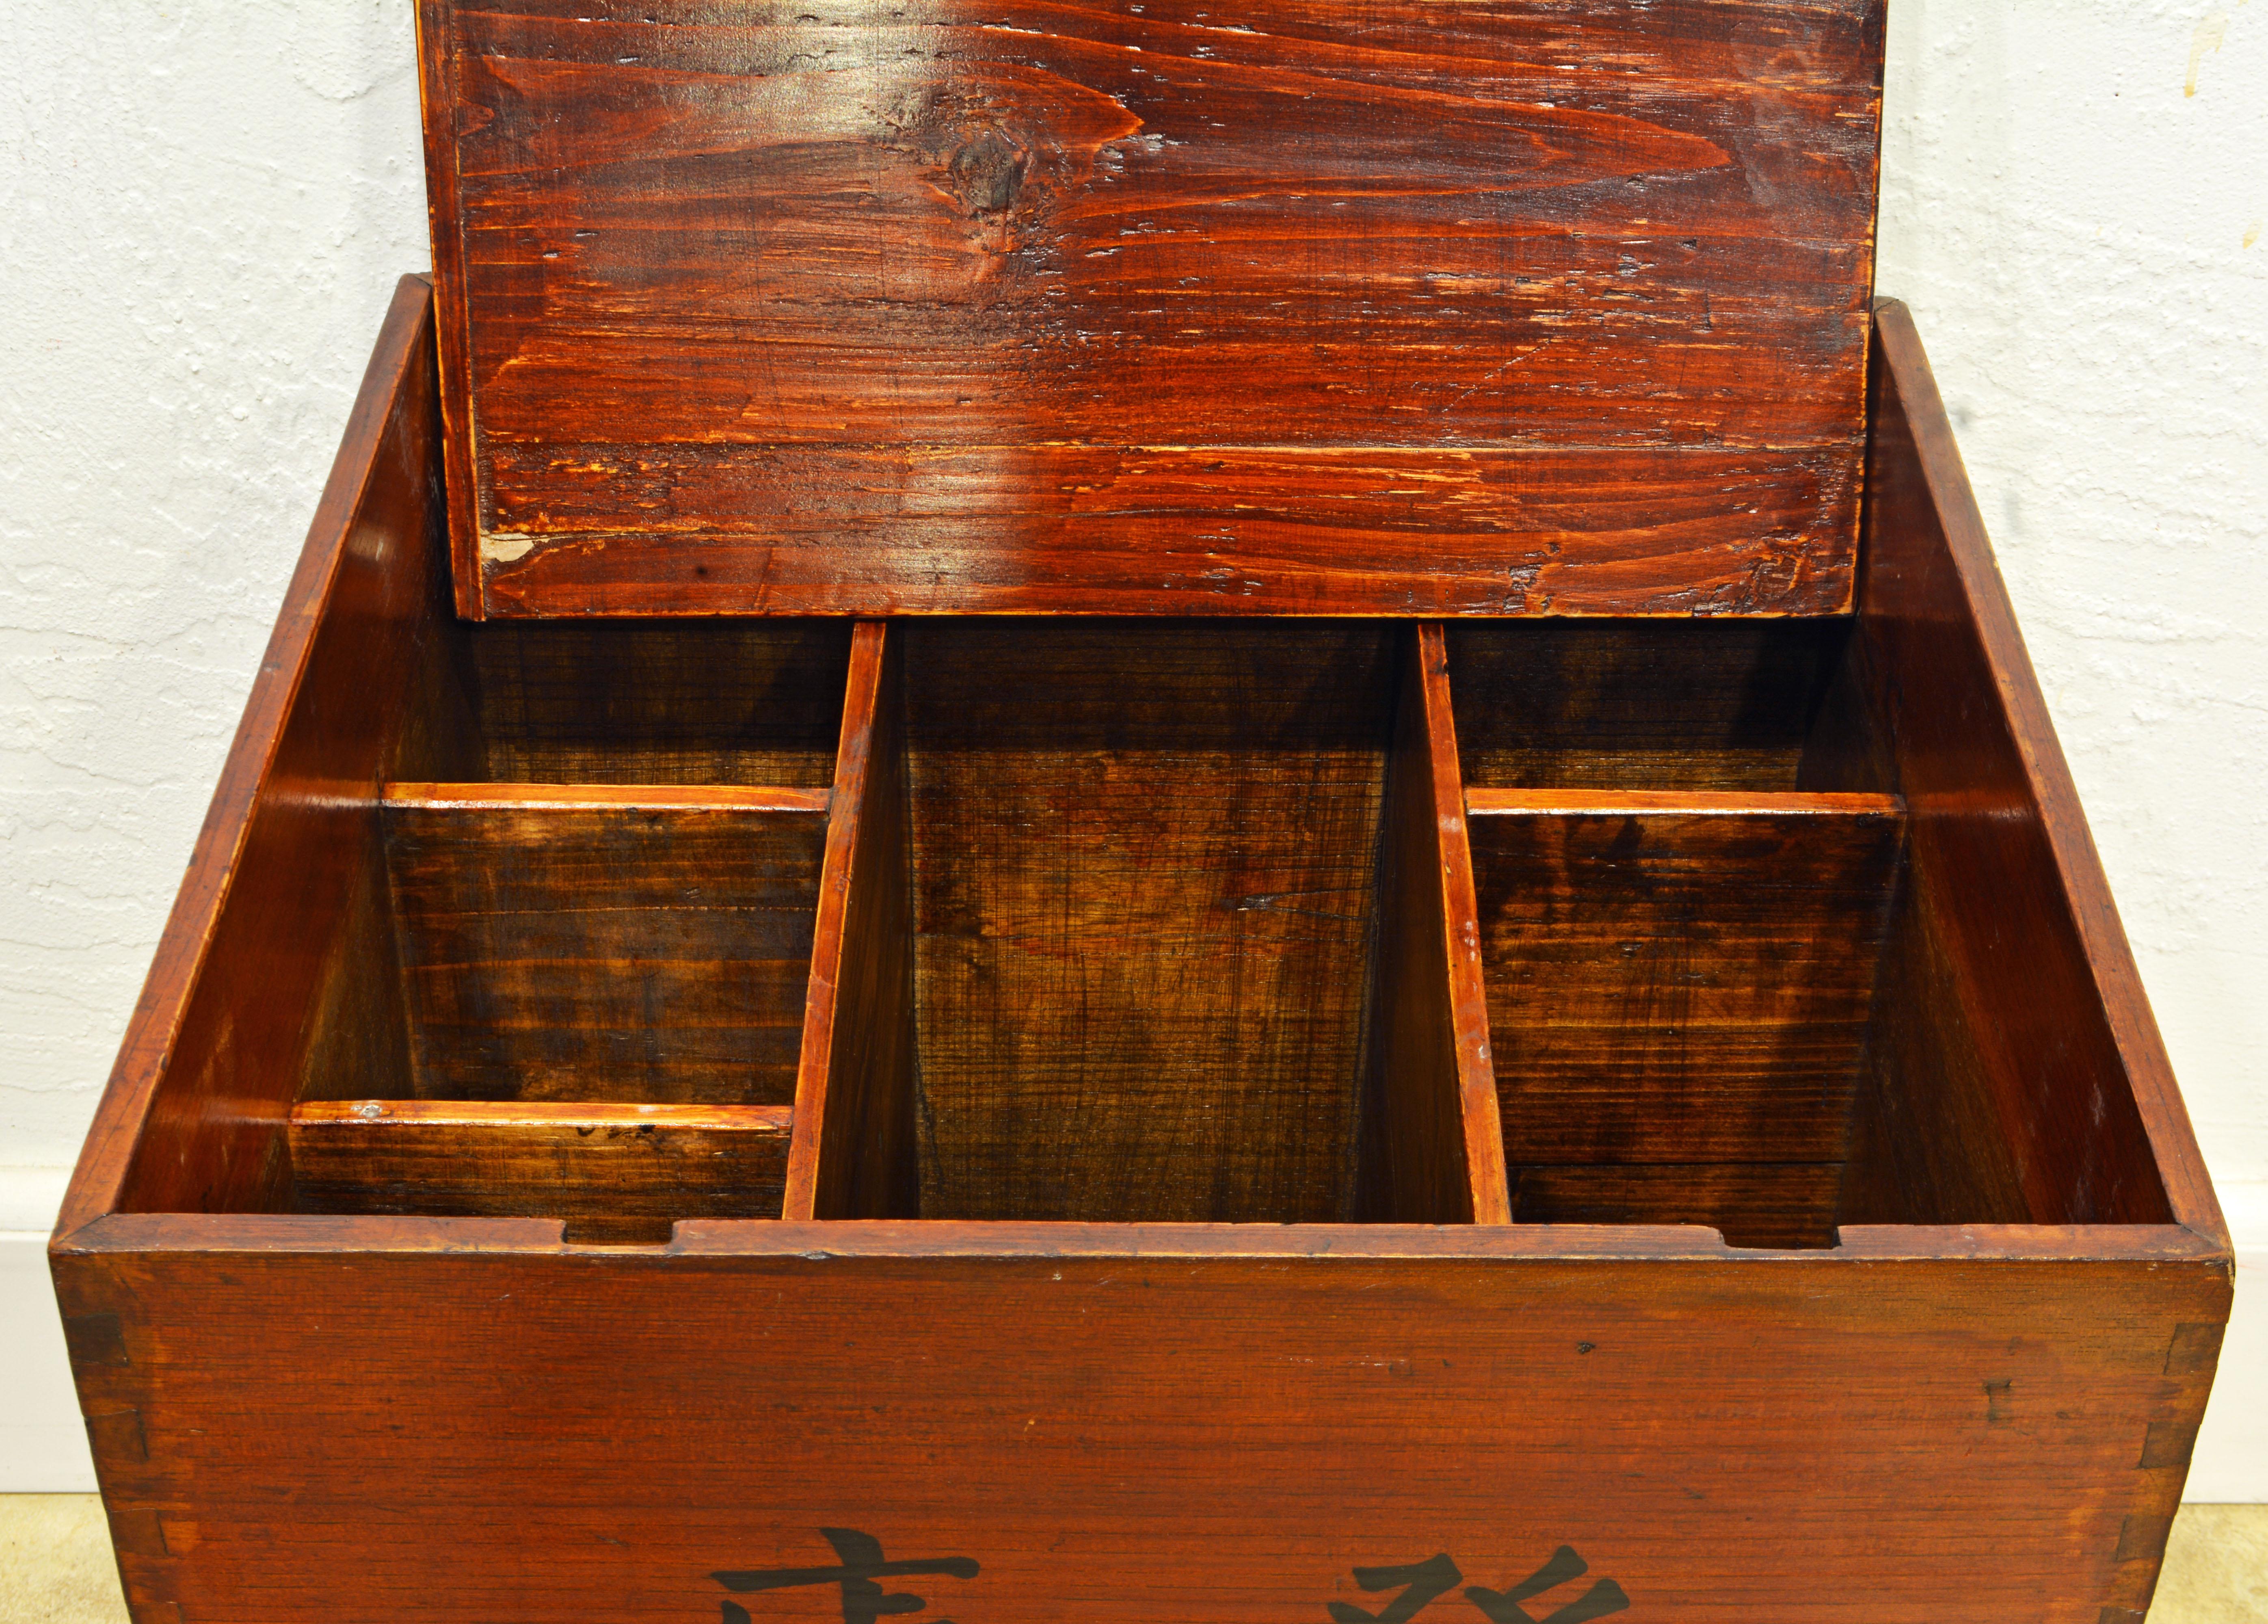 Wood Early 20th Century Japanese Inscribed and Dovetailed Merchant's Storage Box